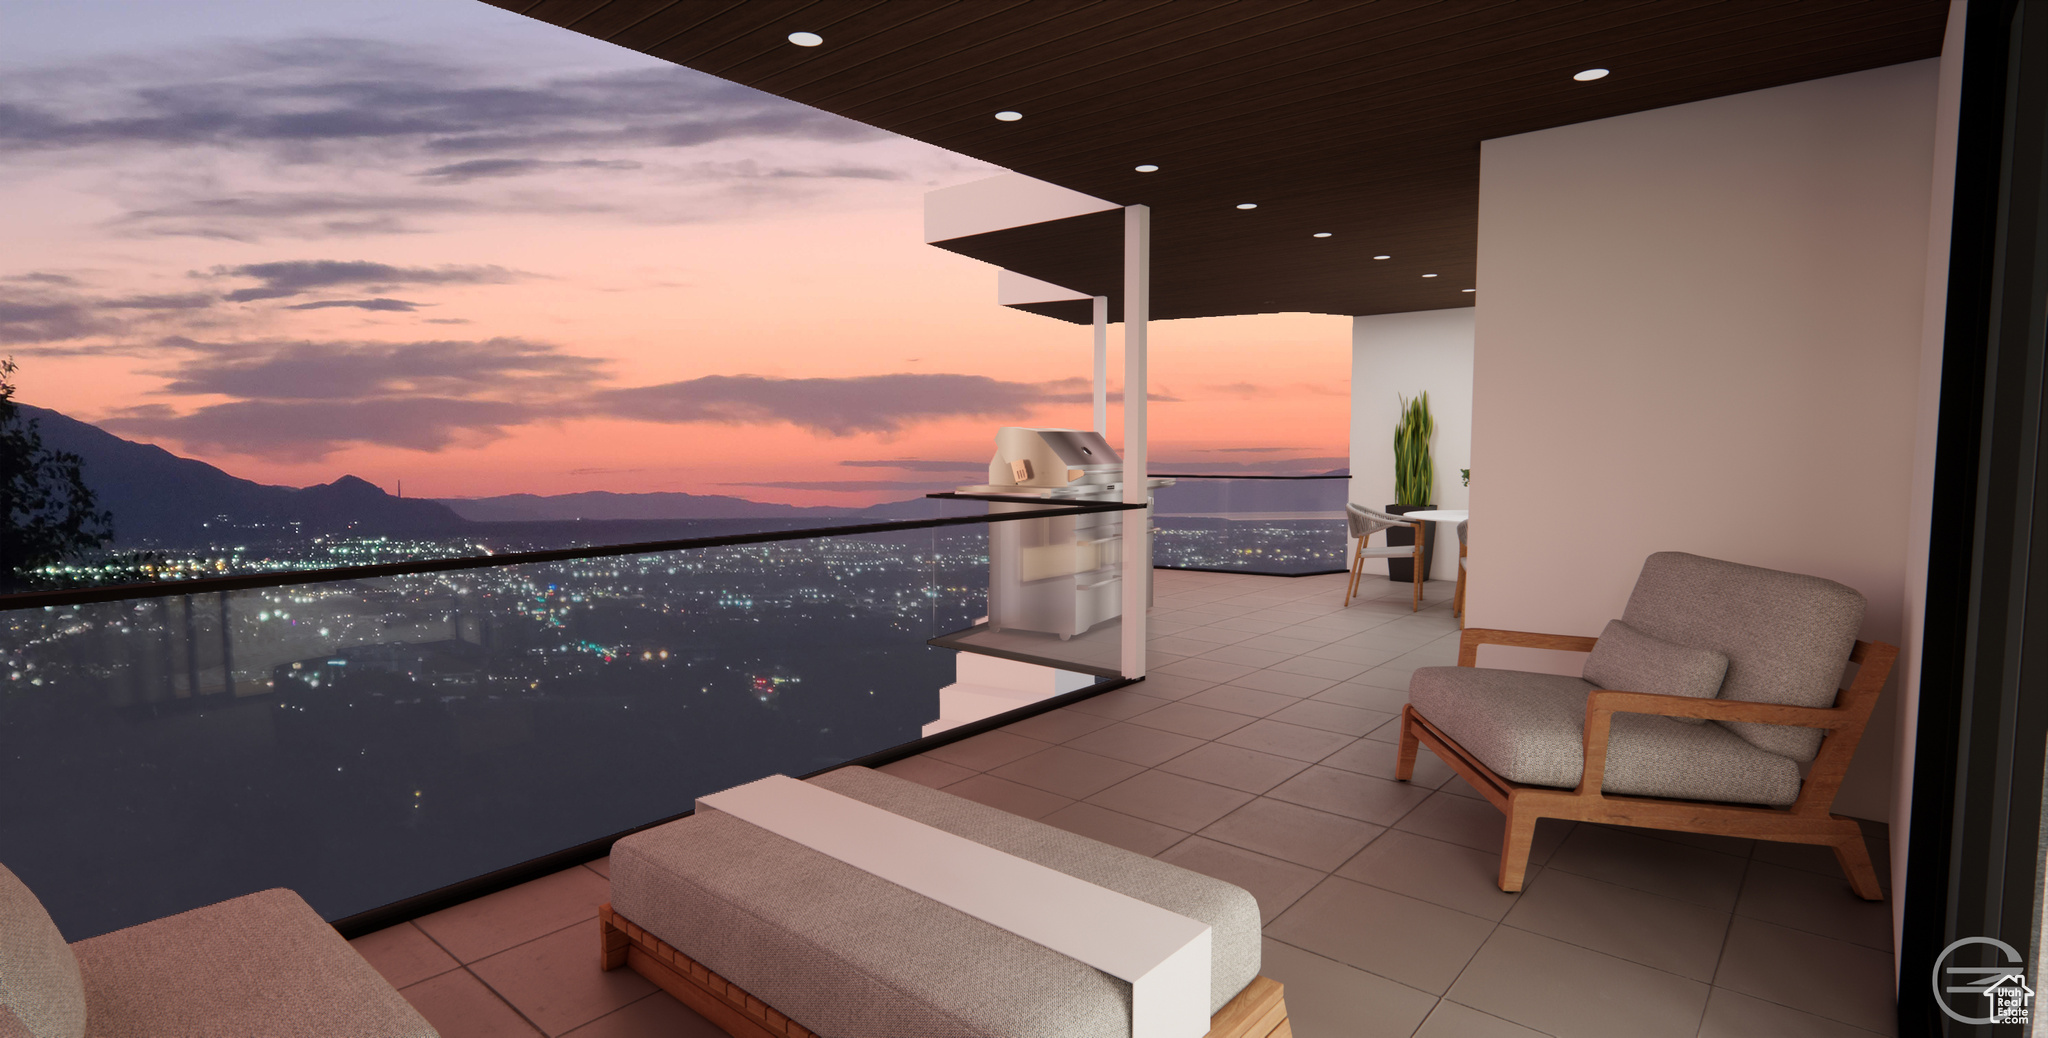 Balcony at dusk with grilling area and a mountain view - RENDERING with actual view